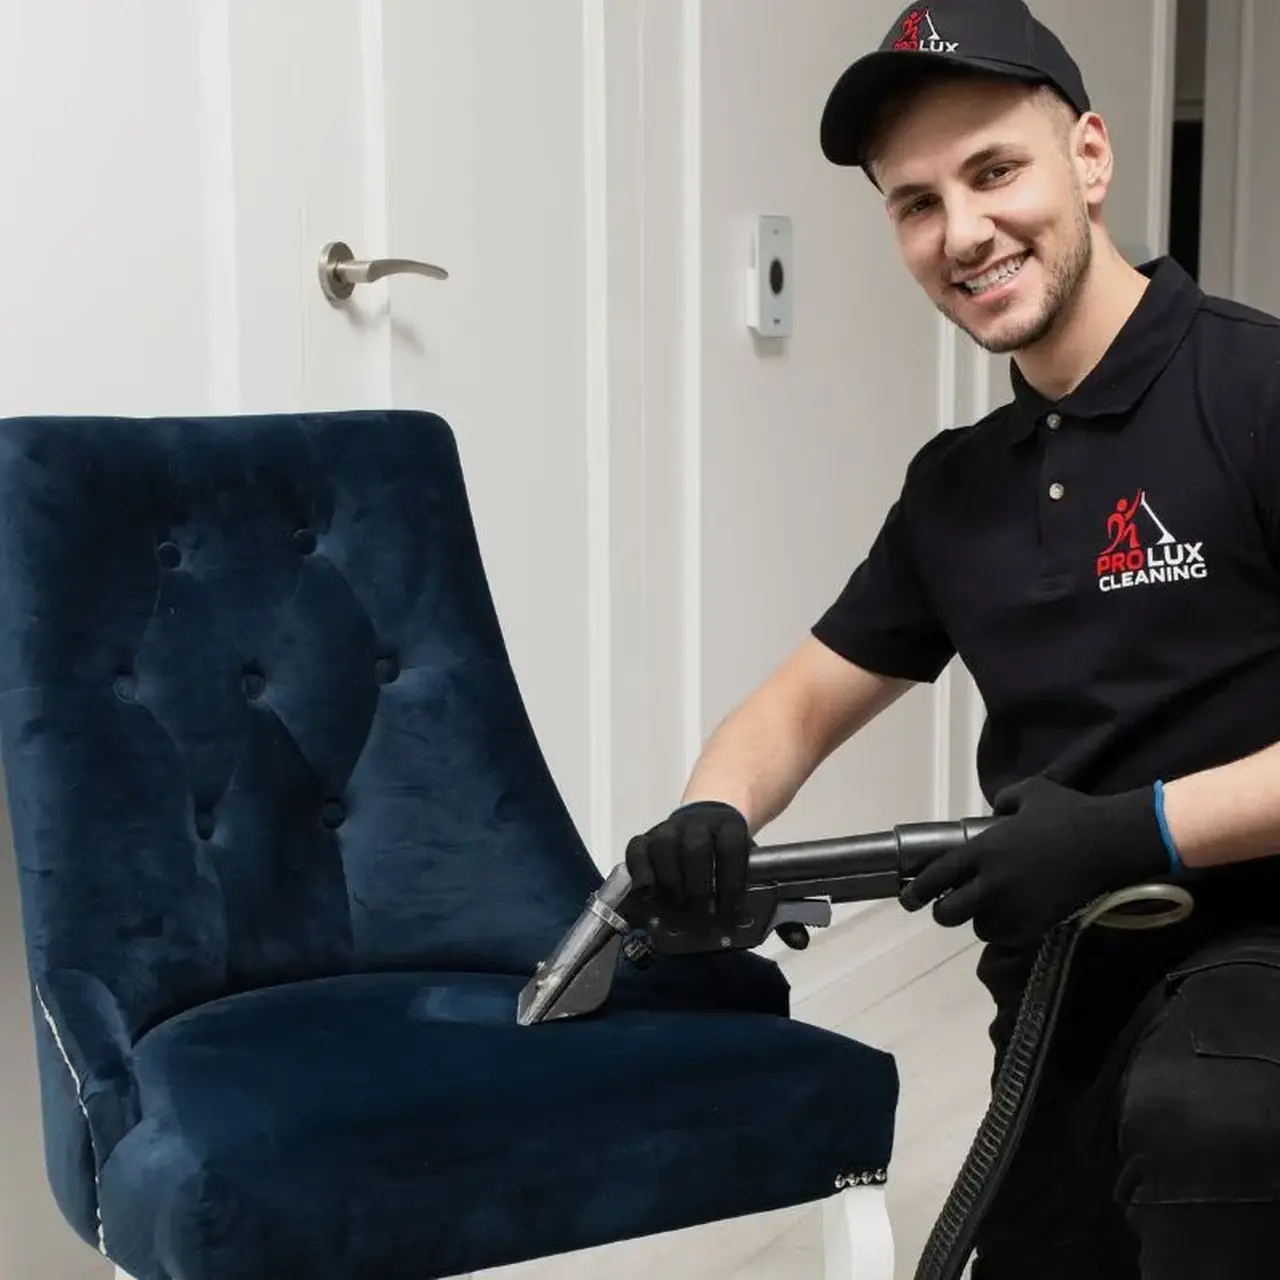 Upholstery Cleaners - Techician Camden